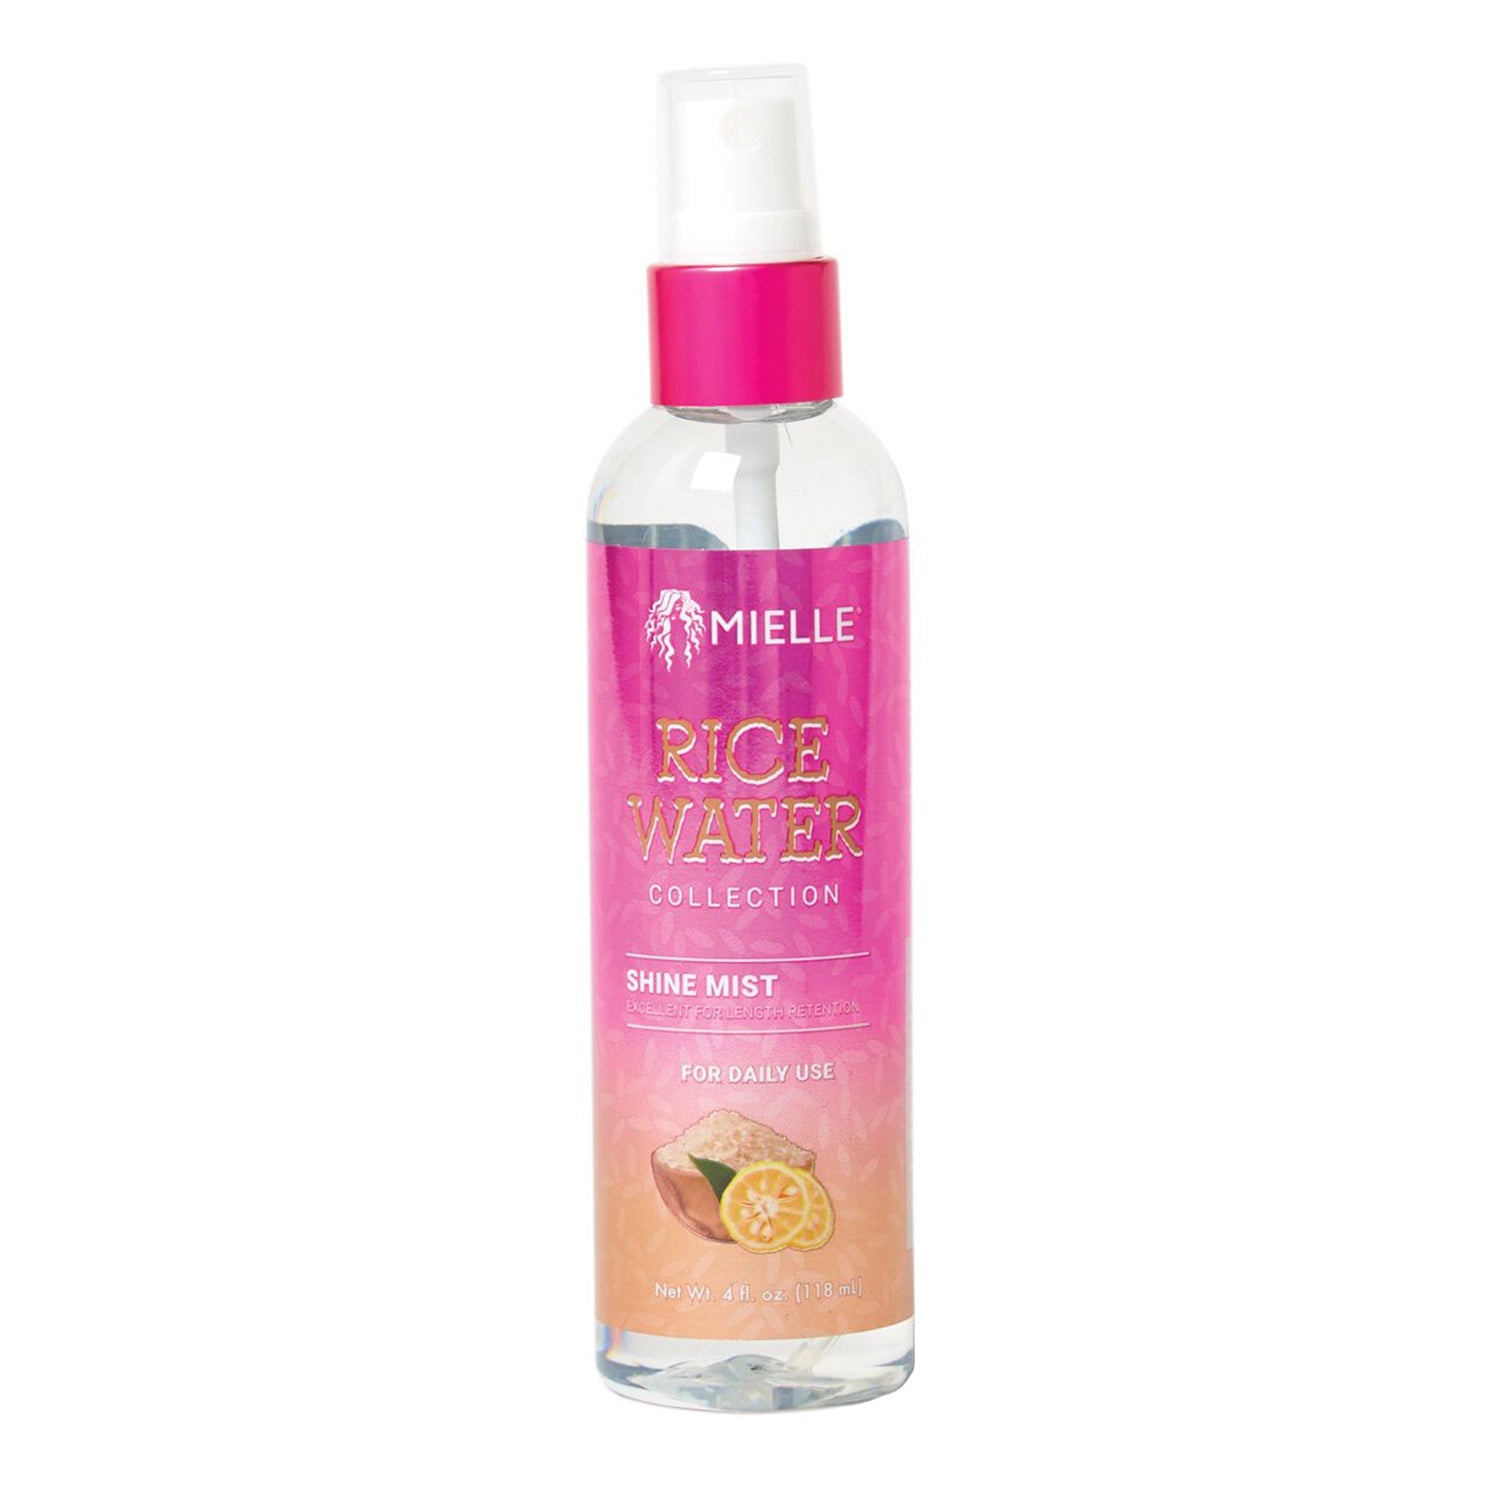 Mielle Rice Water Collection Shine Mist 4oz